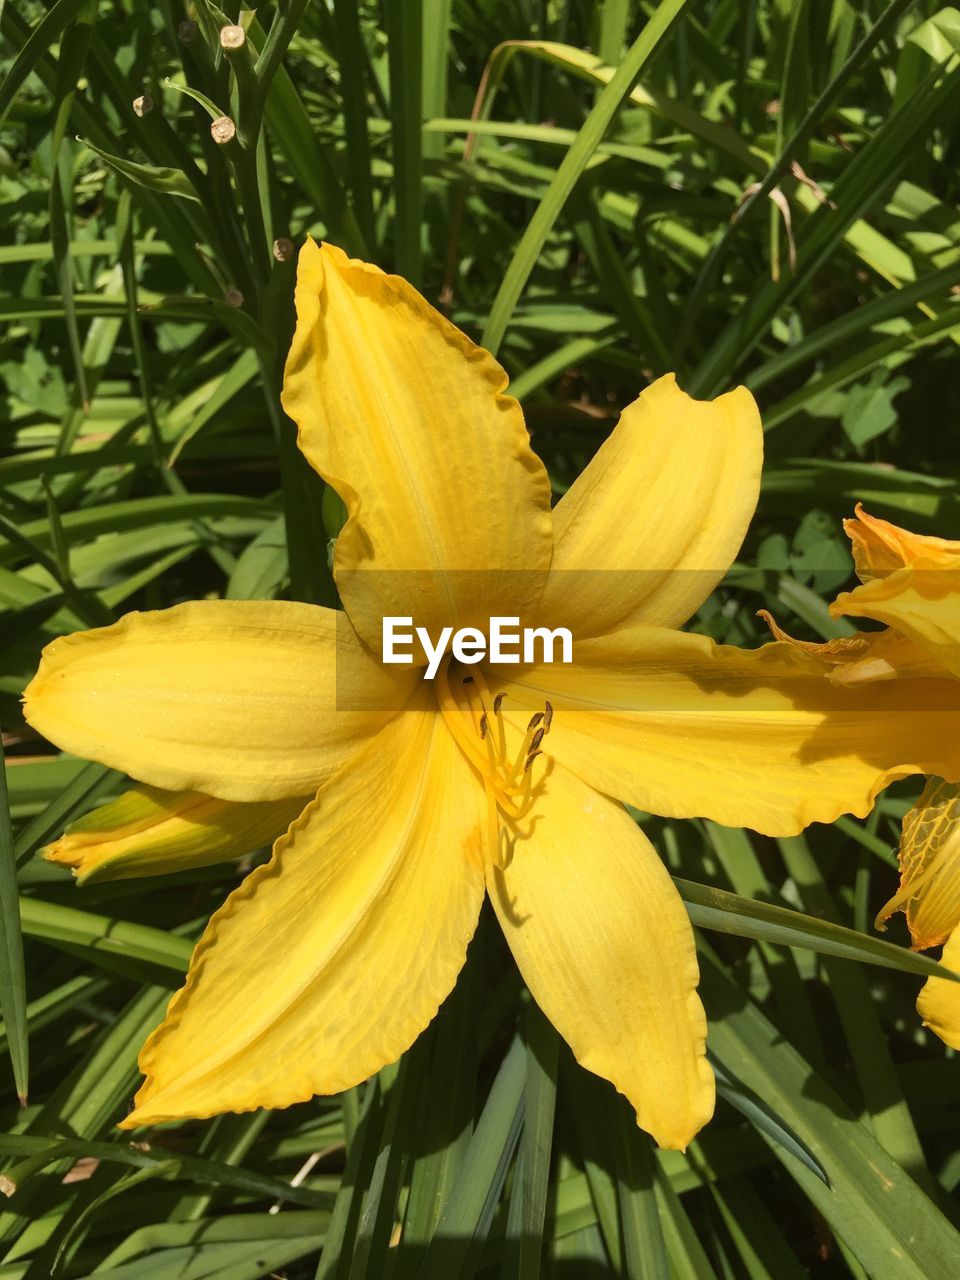 CLOSE-UP OF YELLOW DAY LILY